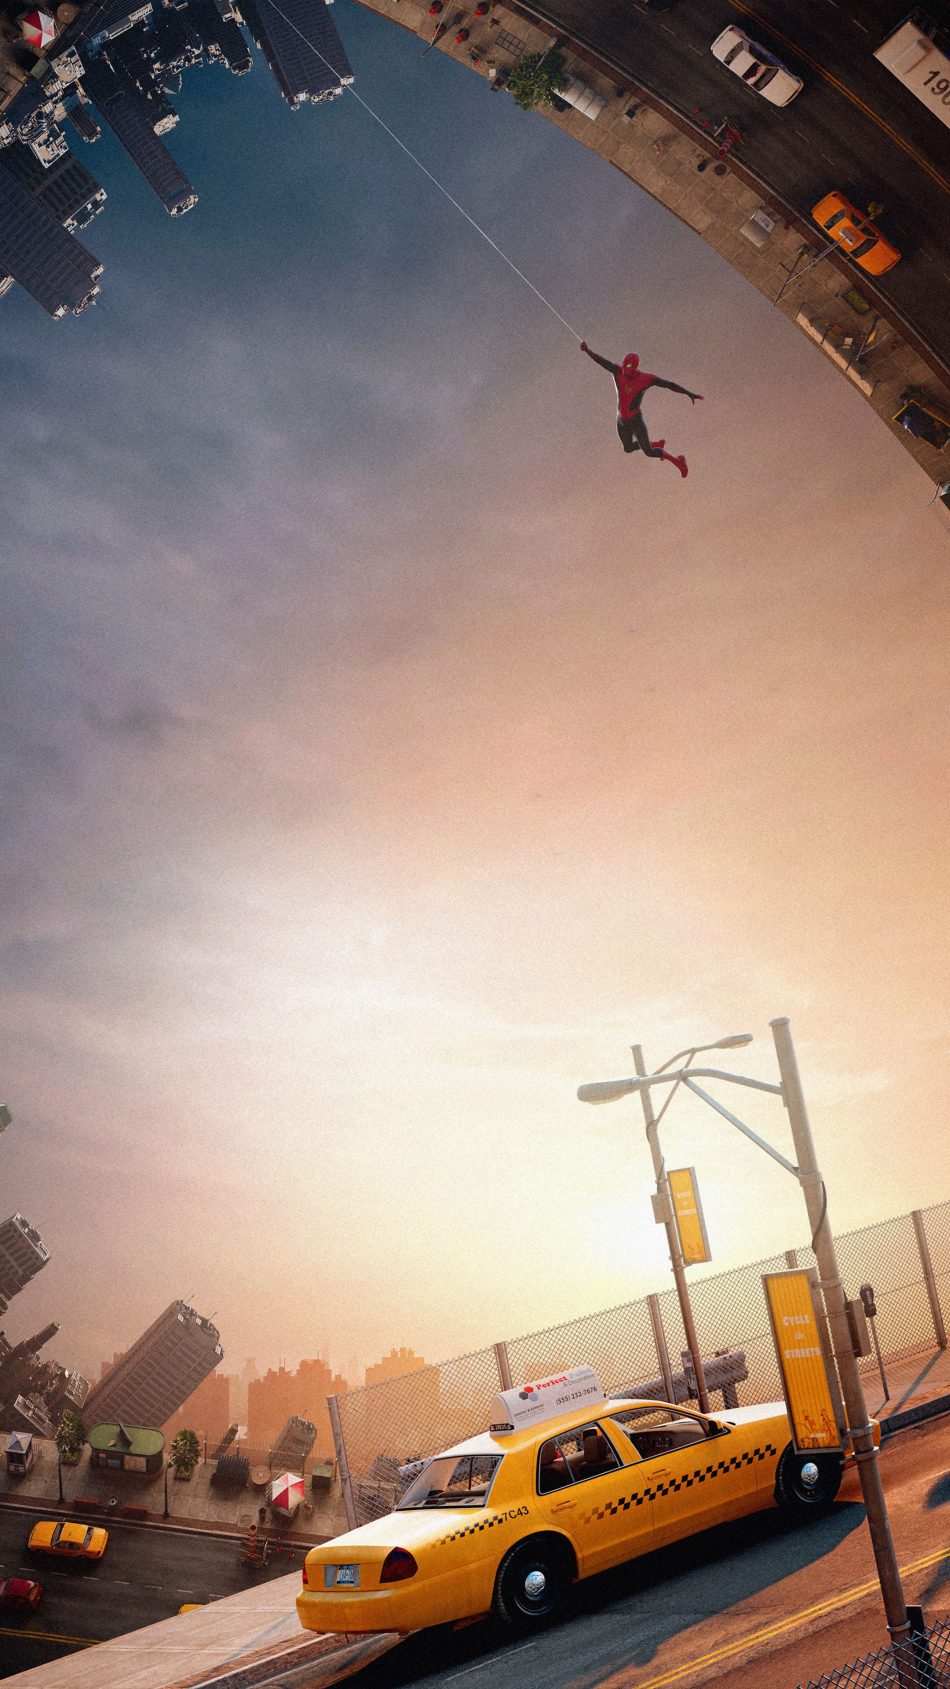 Spider-Man Flying No Way Home 4K Ultra HD Mobile Wallpaper